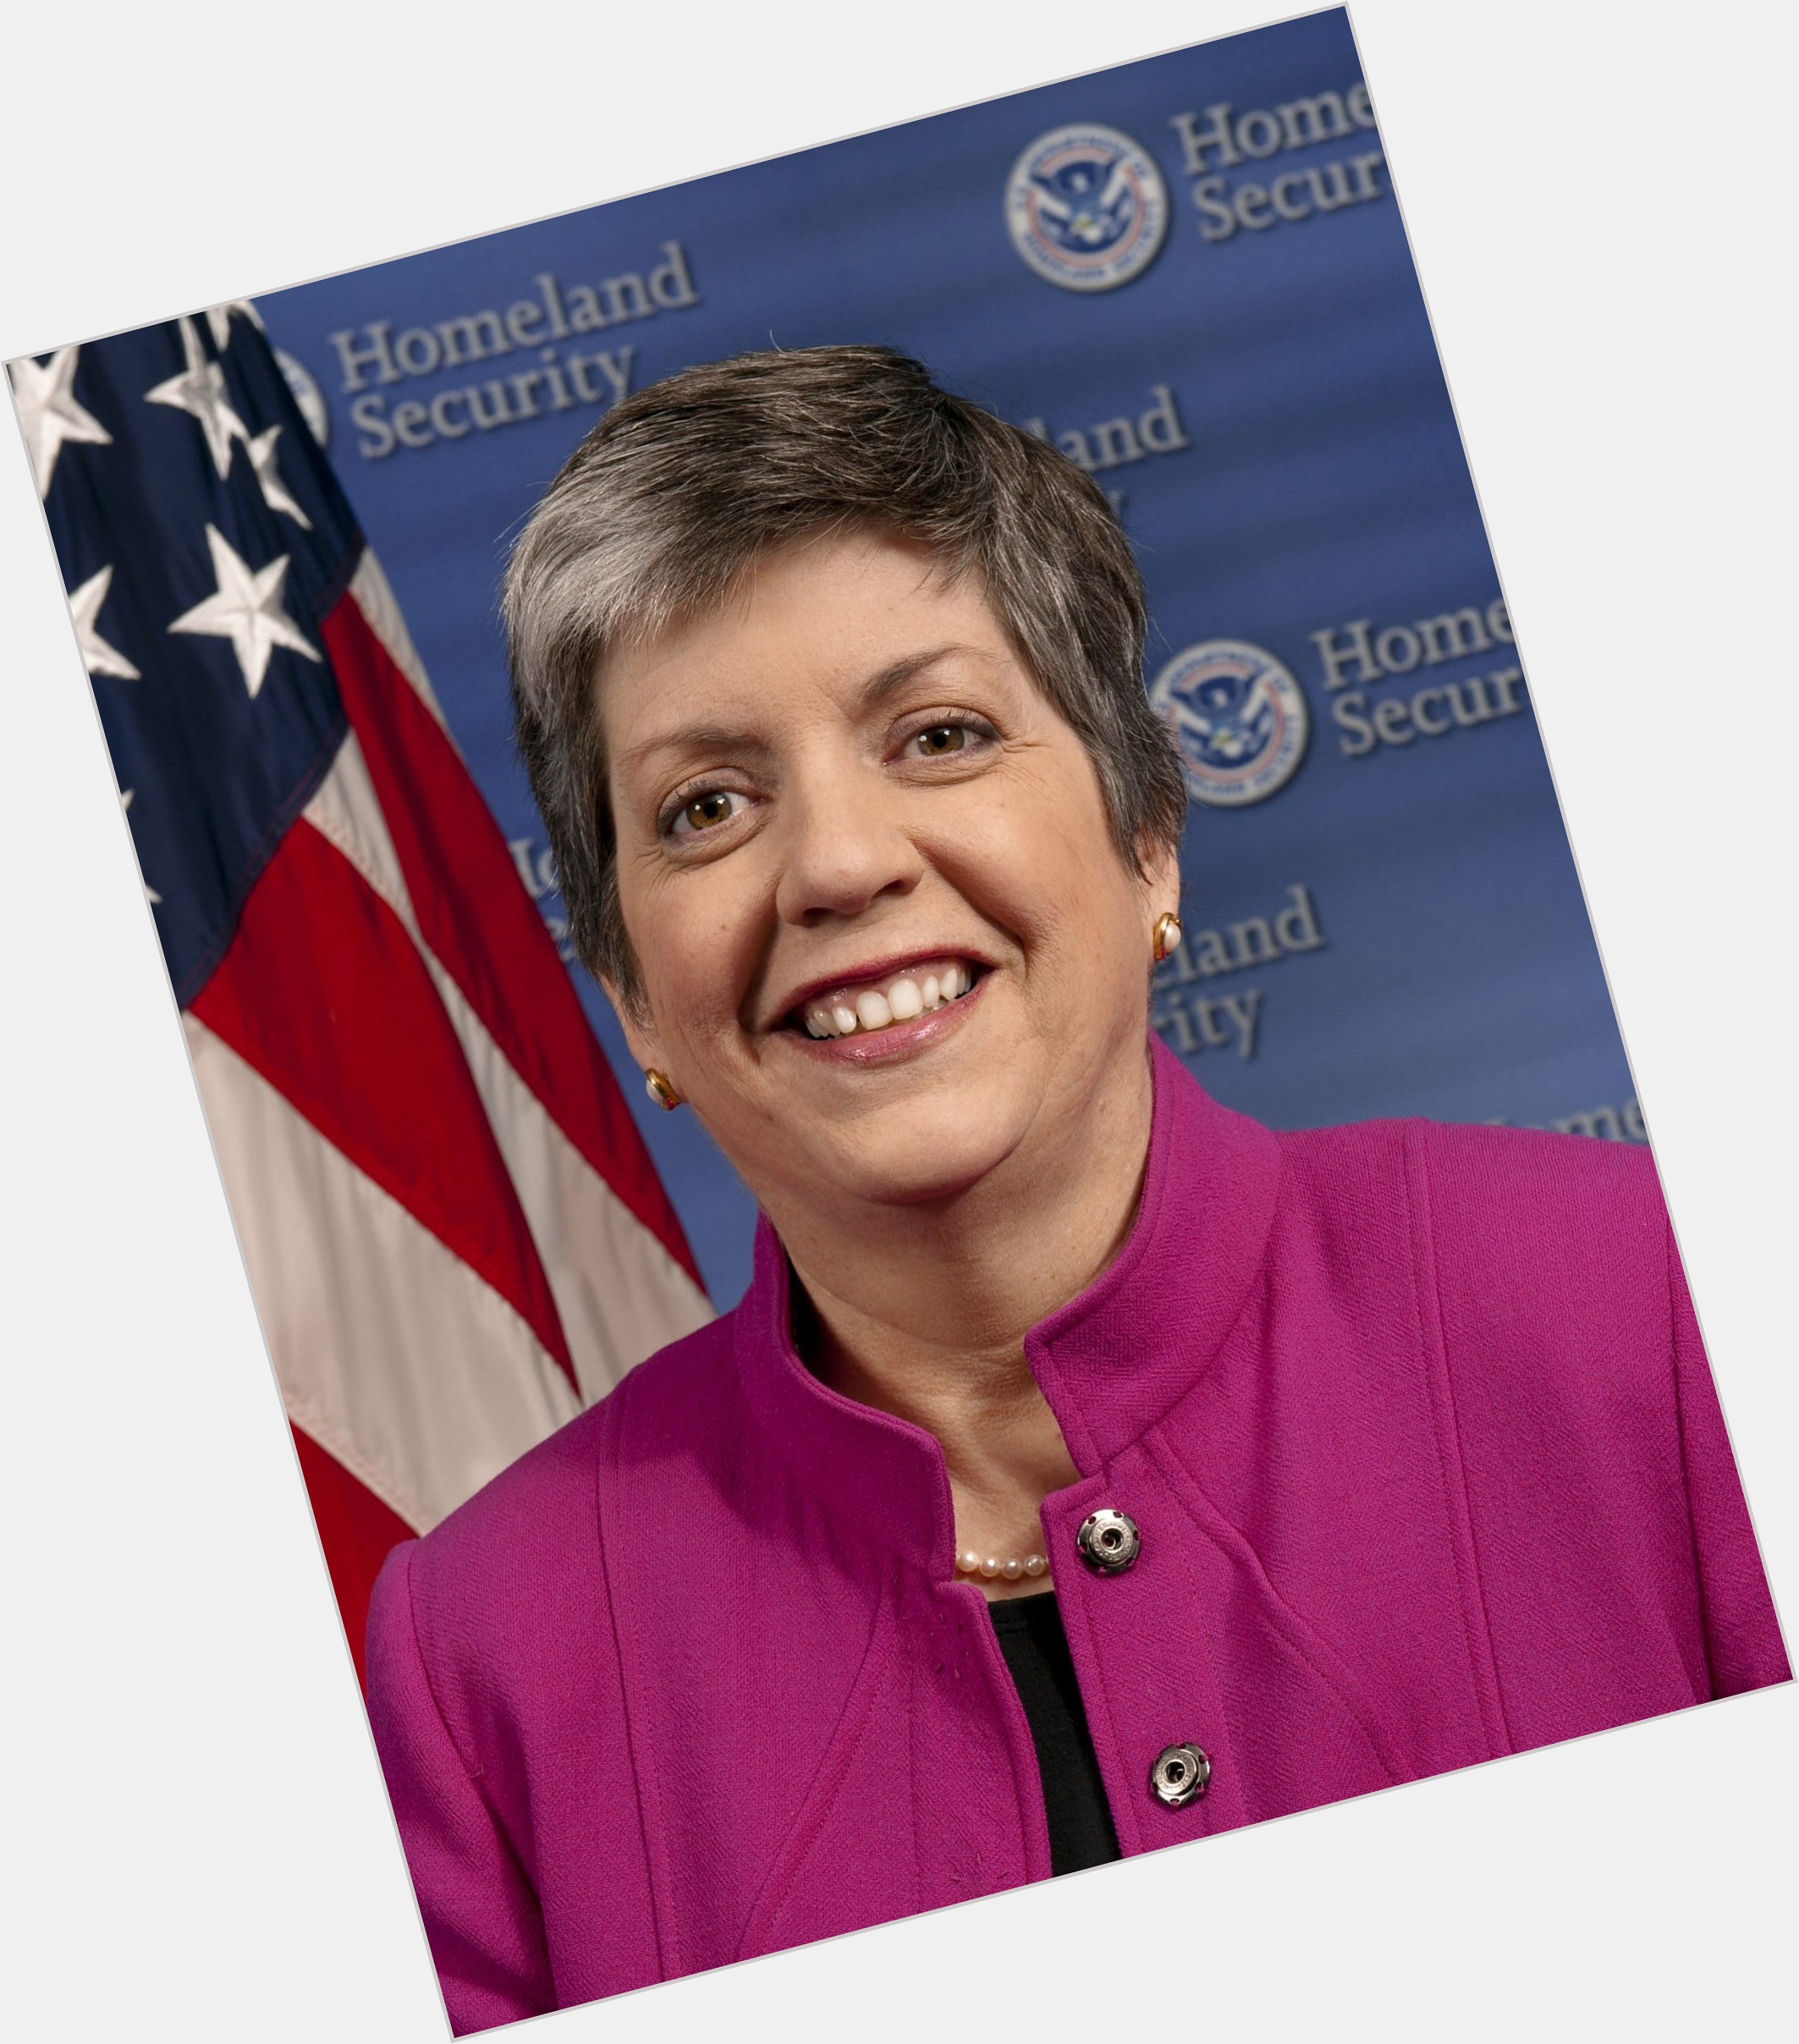 <a href="/hot-women/janet-napolitano/where-dating-news-photos">Janet Napolitano</a> Average body,  dark brown hair & hairstyles